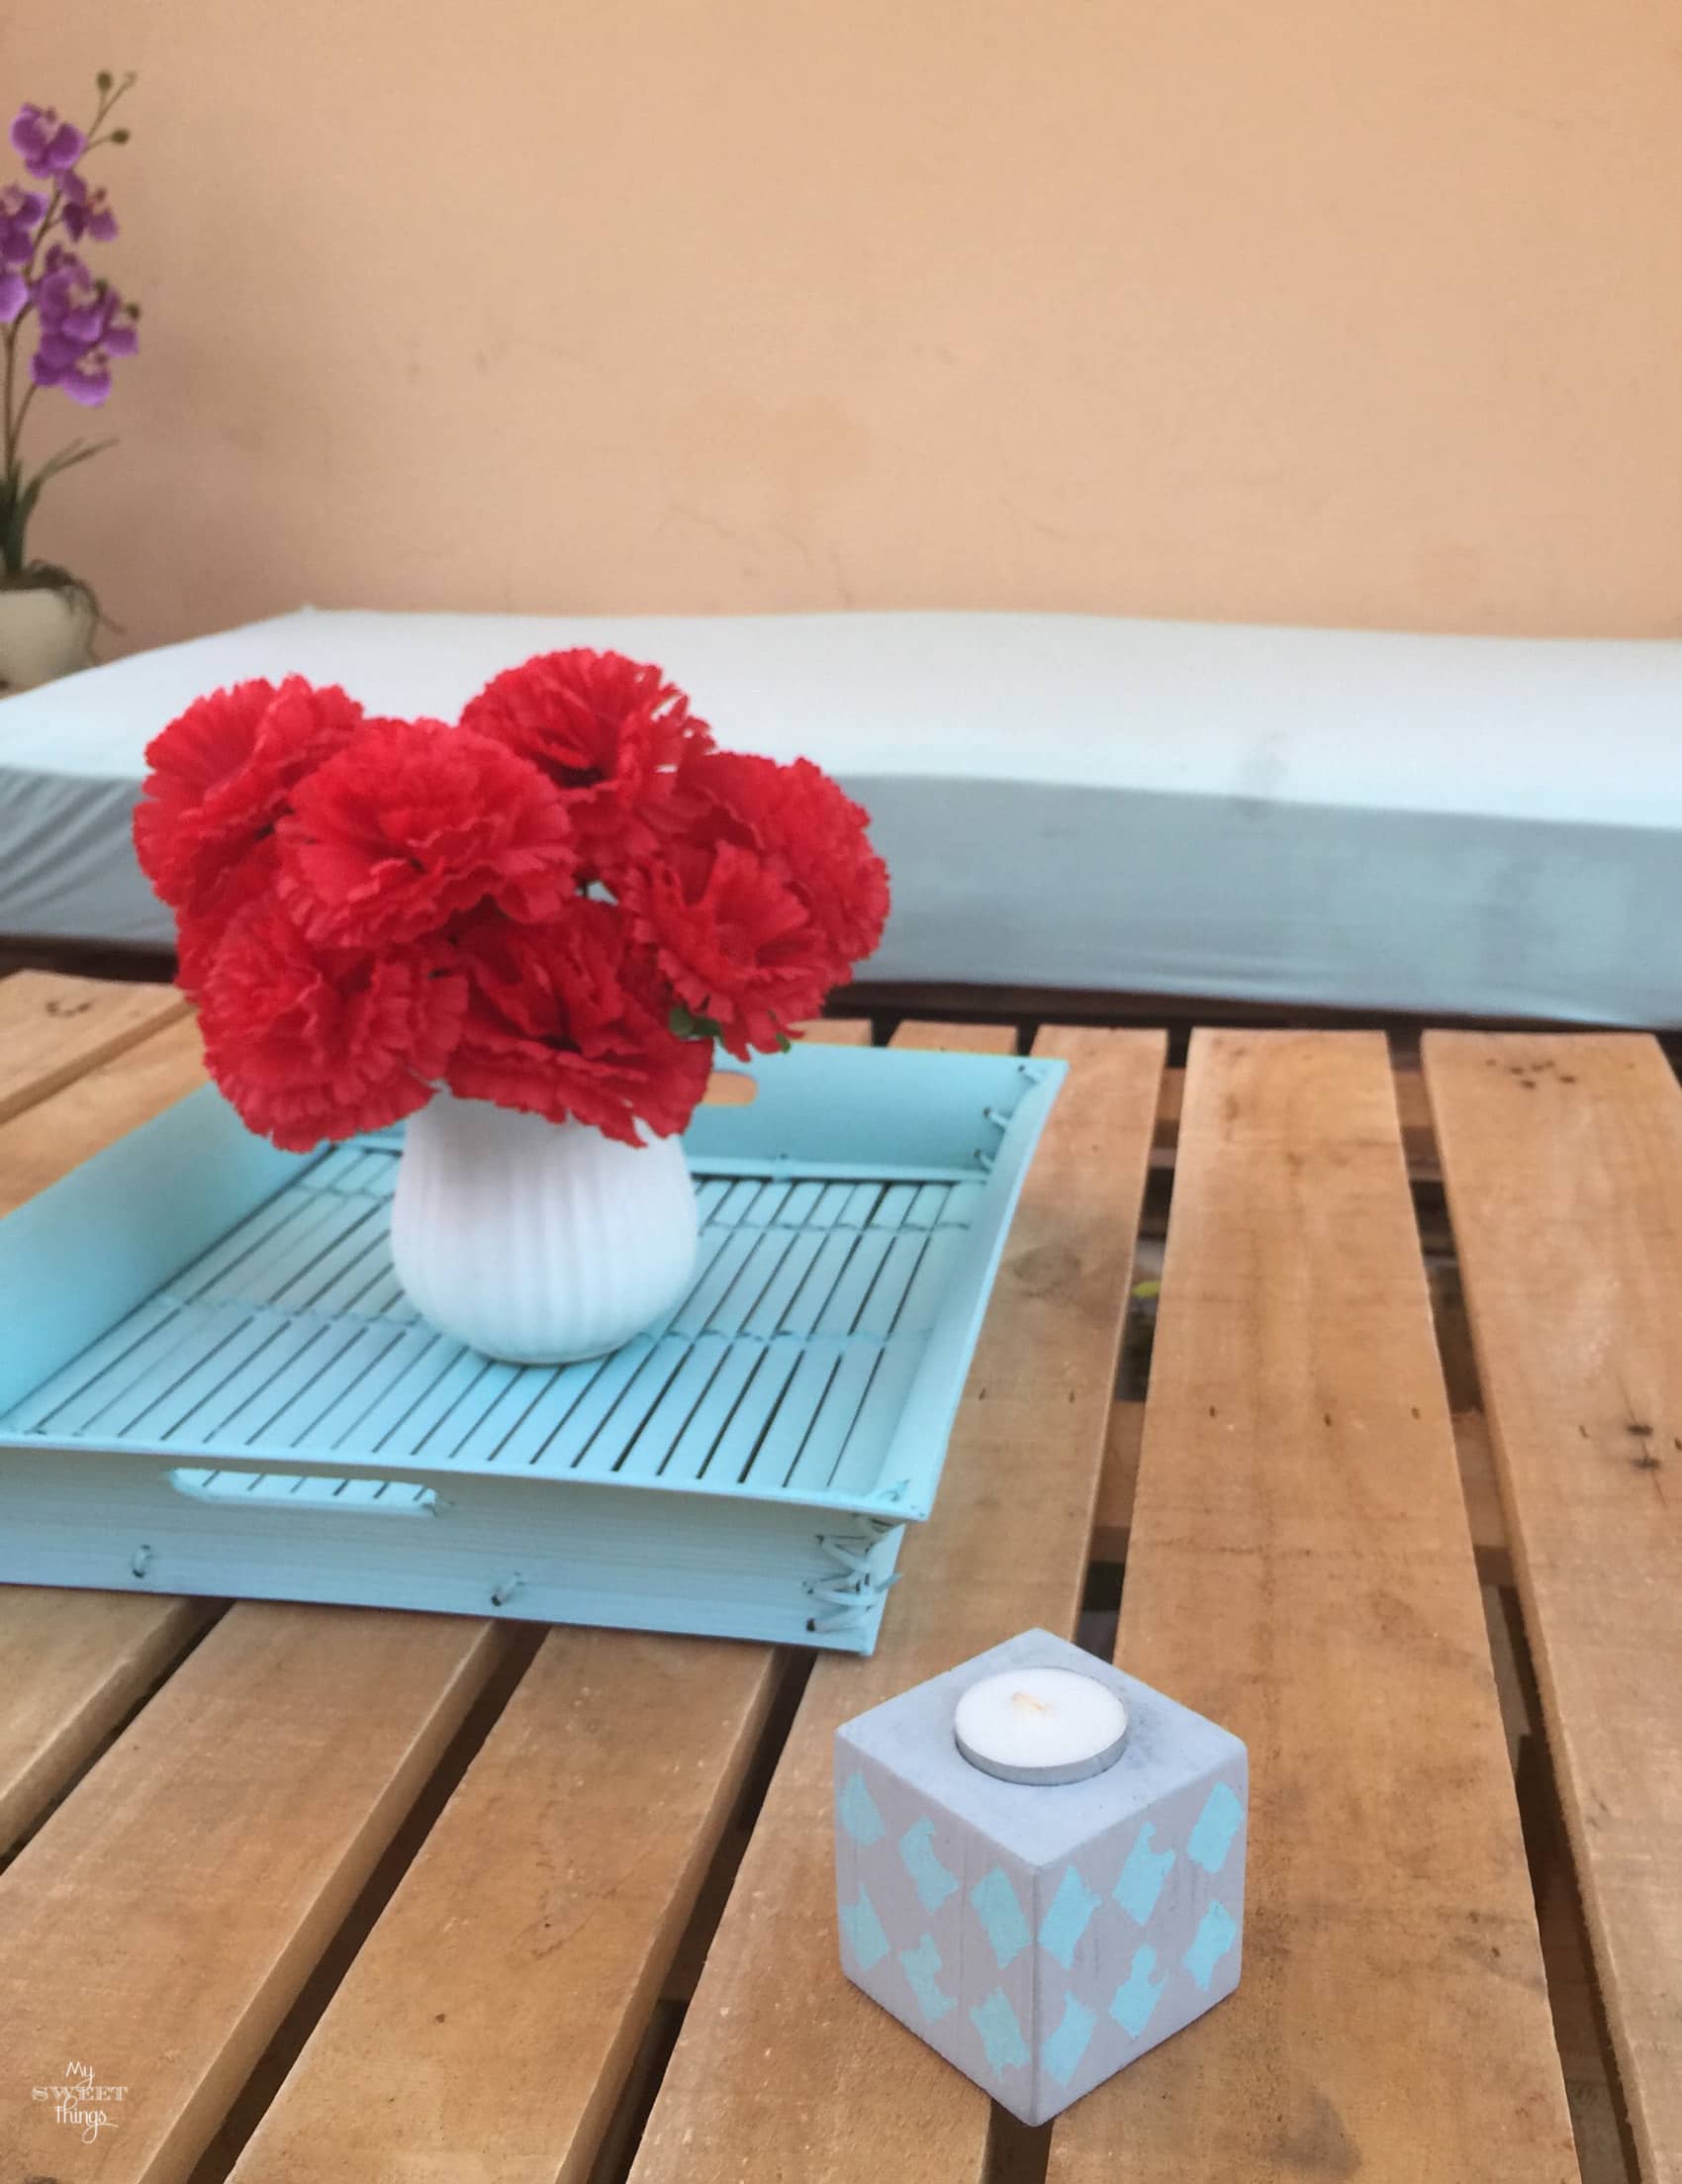 How to make a pretty coastal style tray upcycling and painting an old one · My Sweet Things